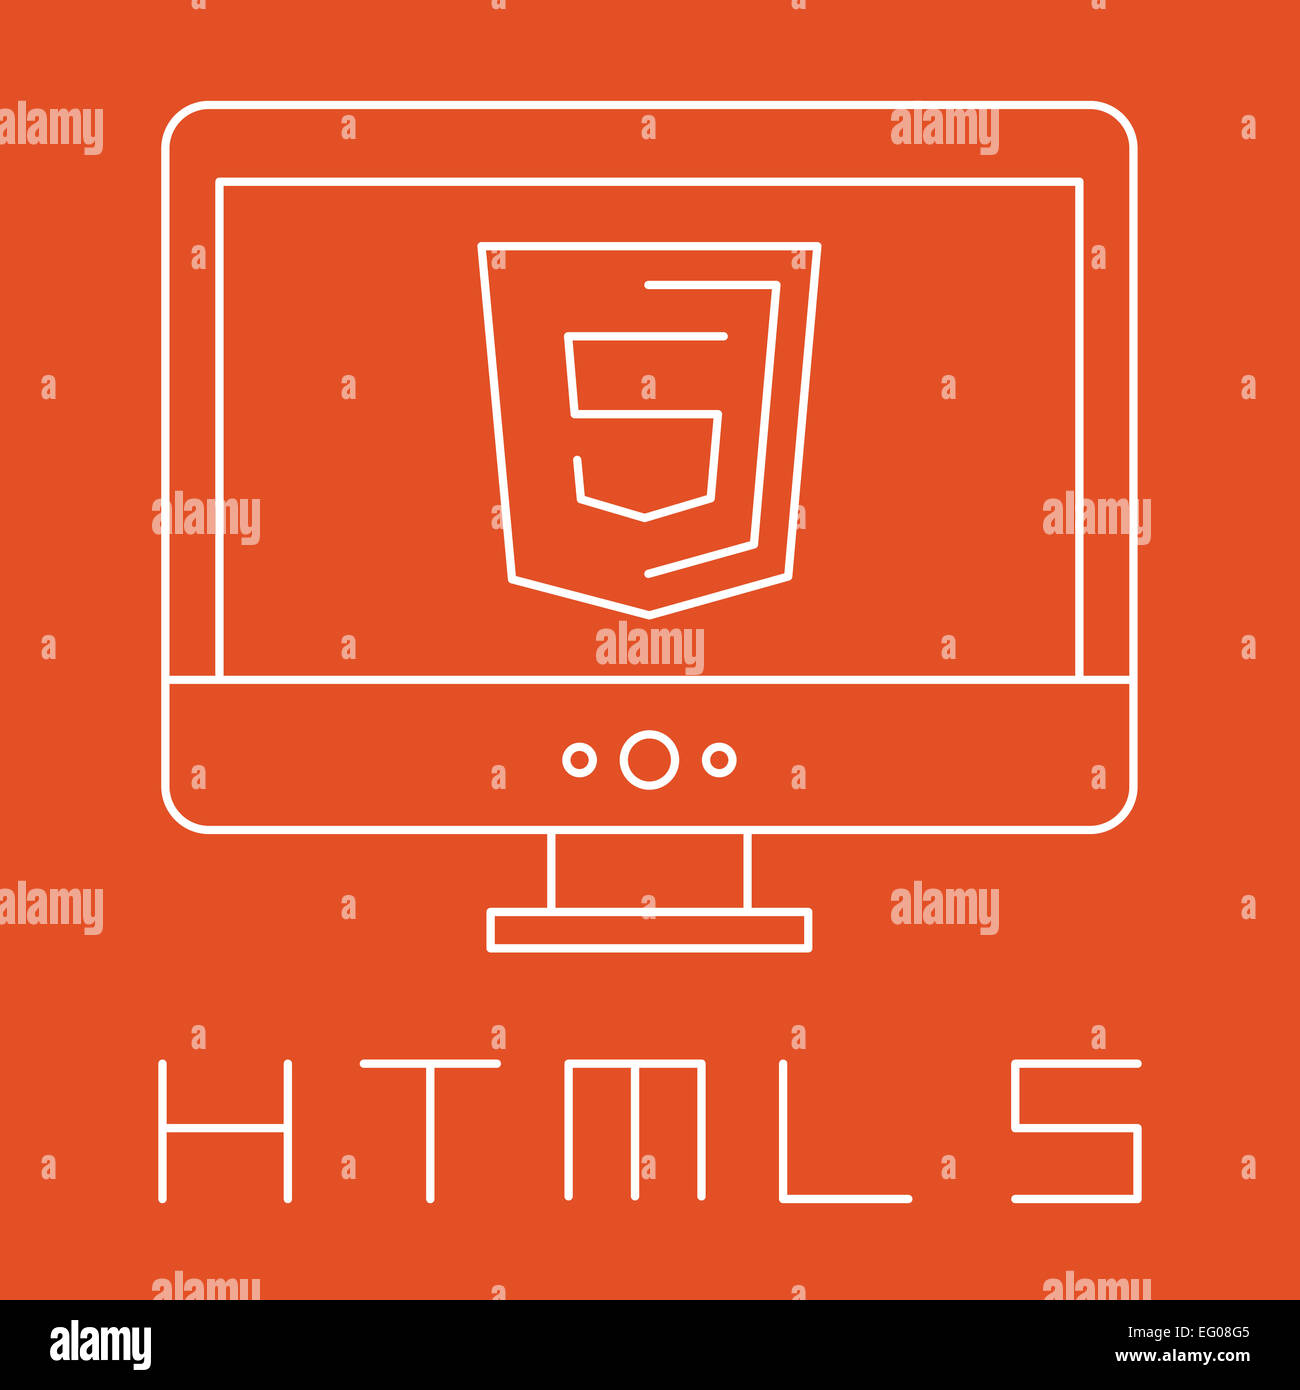 line drawn simple illustration of orange shield with html five sign on the screen, isolated white web site development icon Stock Photo